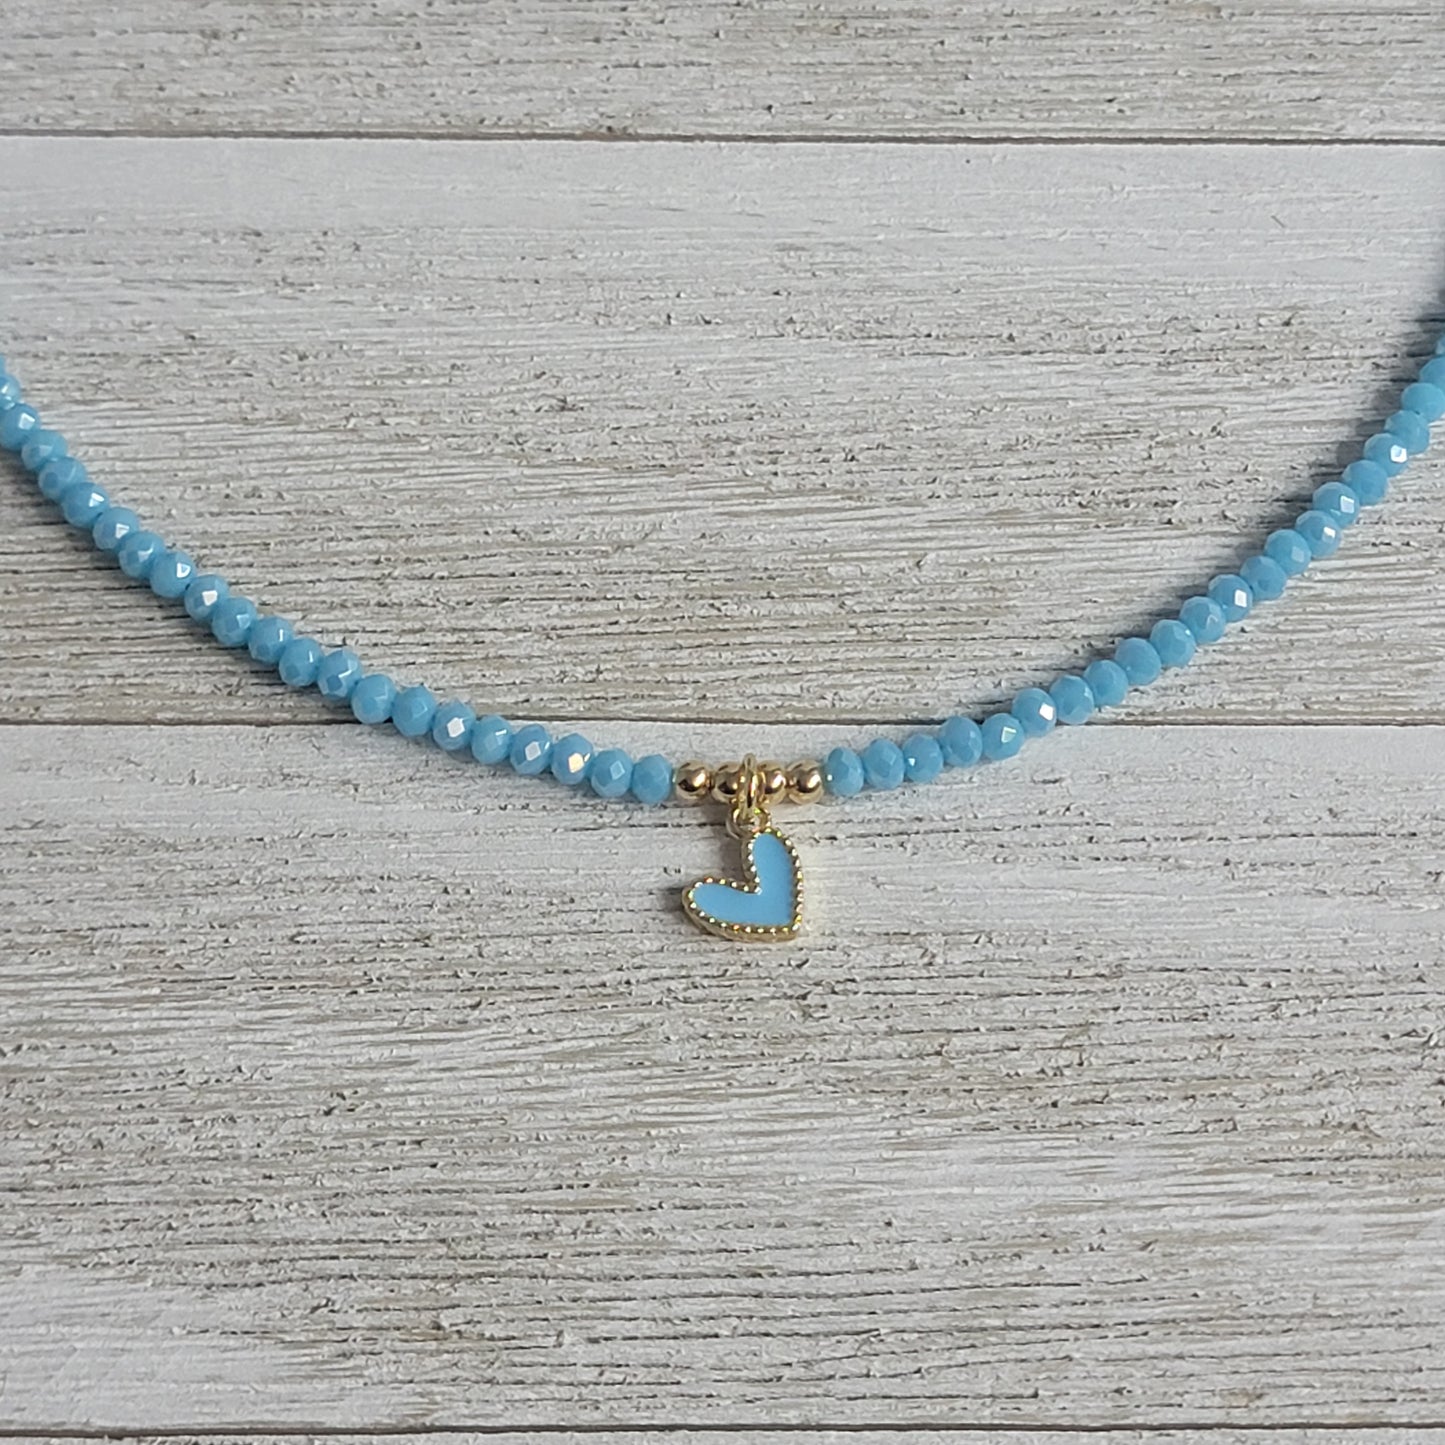 Beaded Blue Heart Crystal Necklace (Available in many Colors)